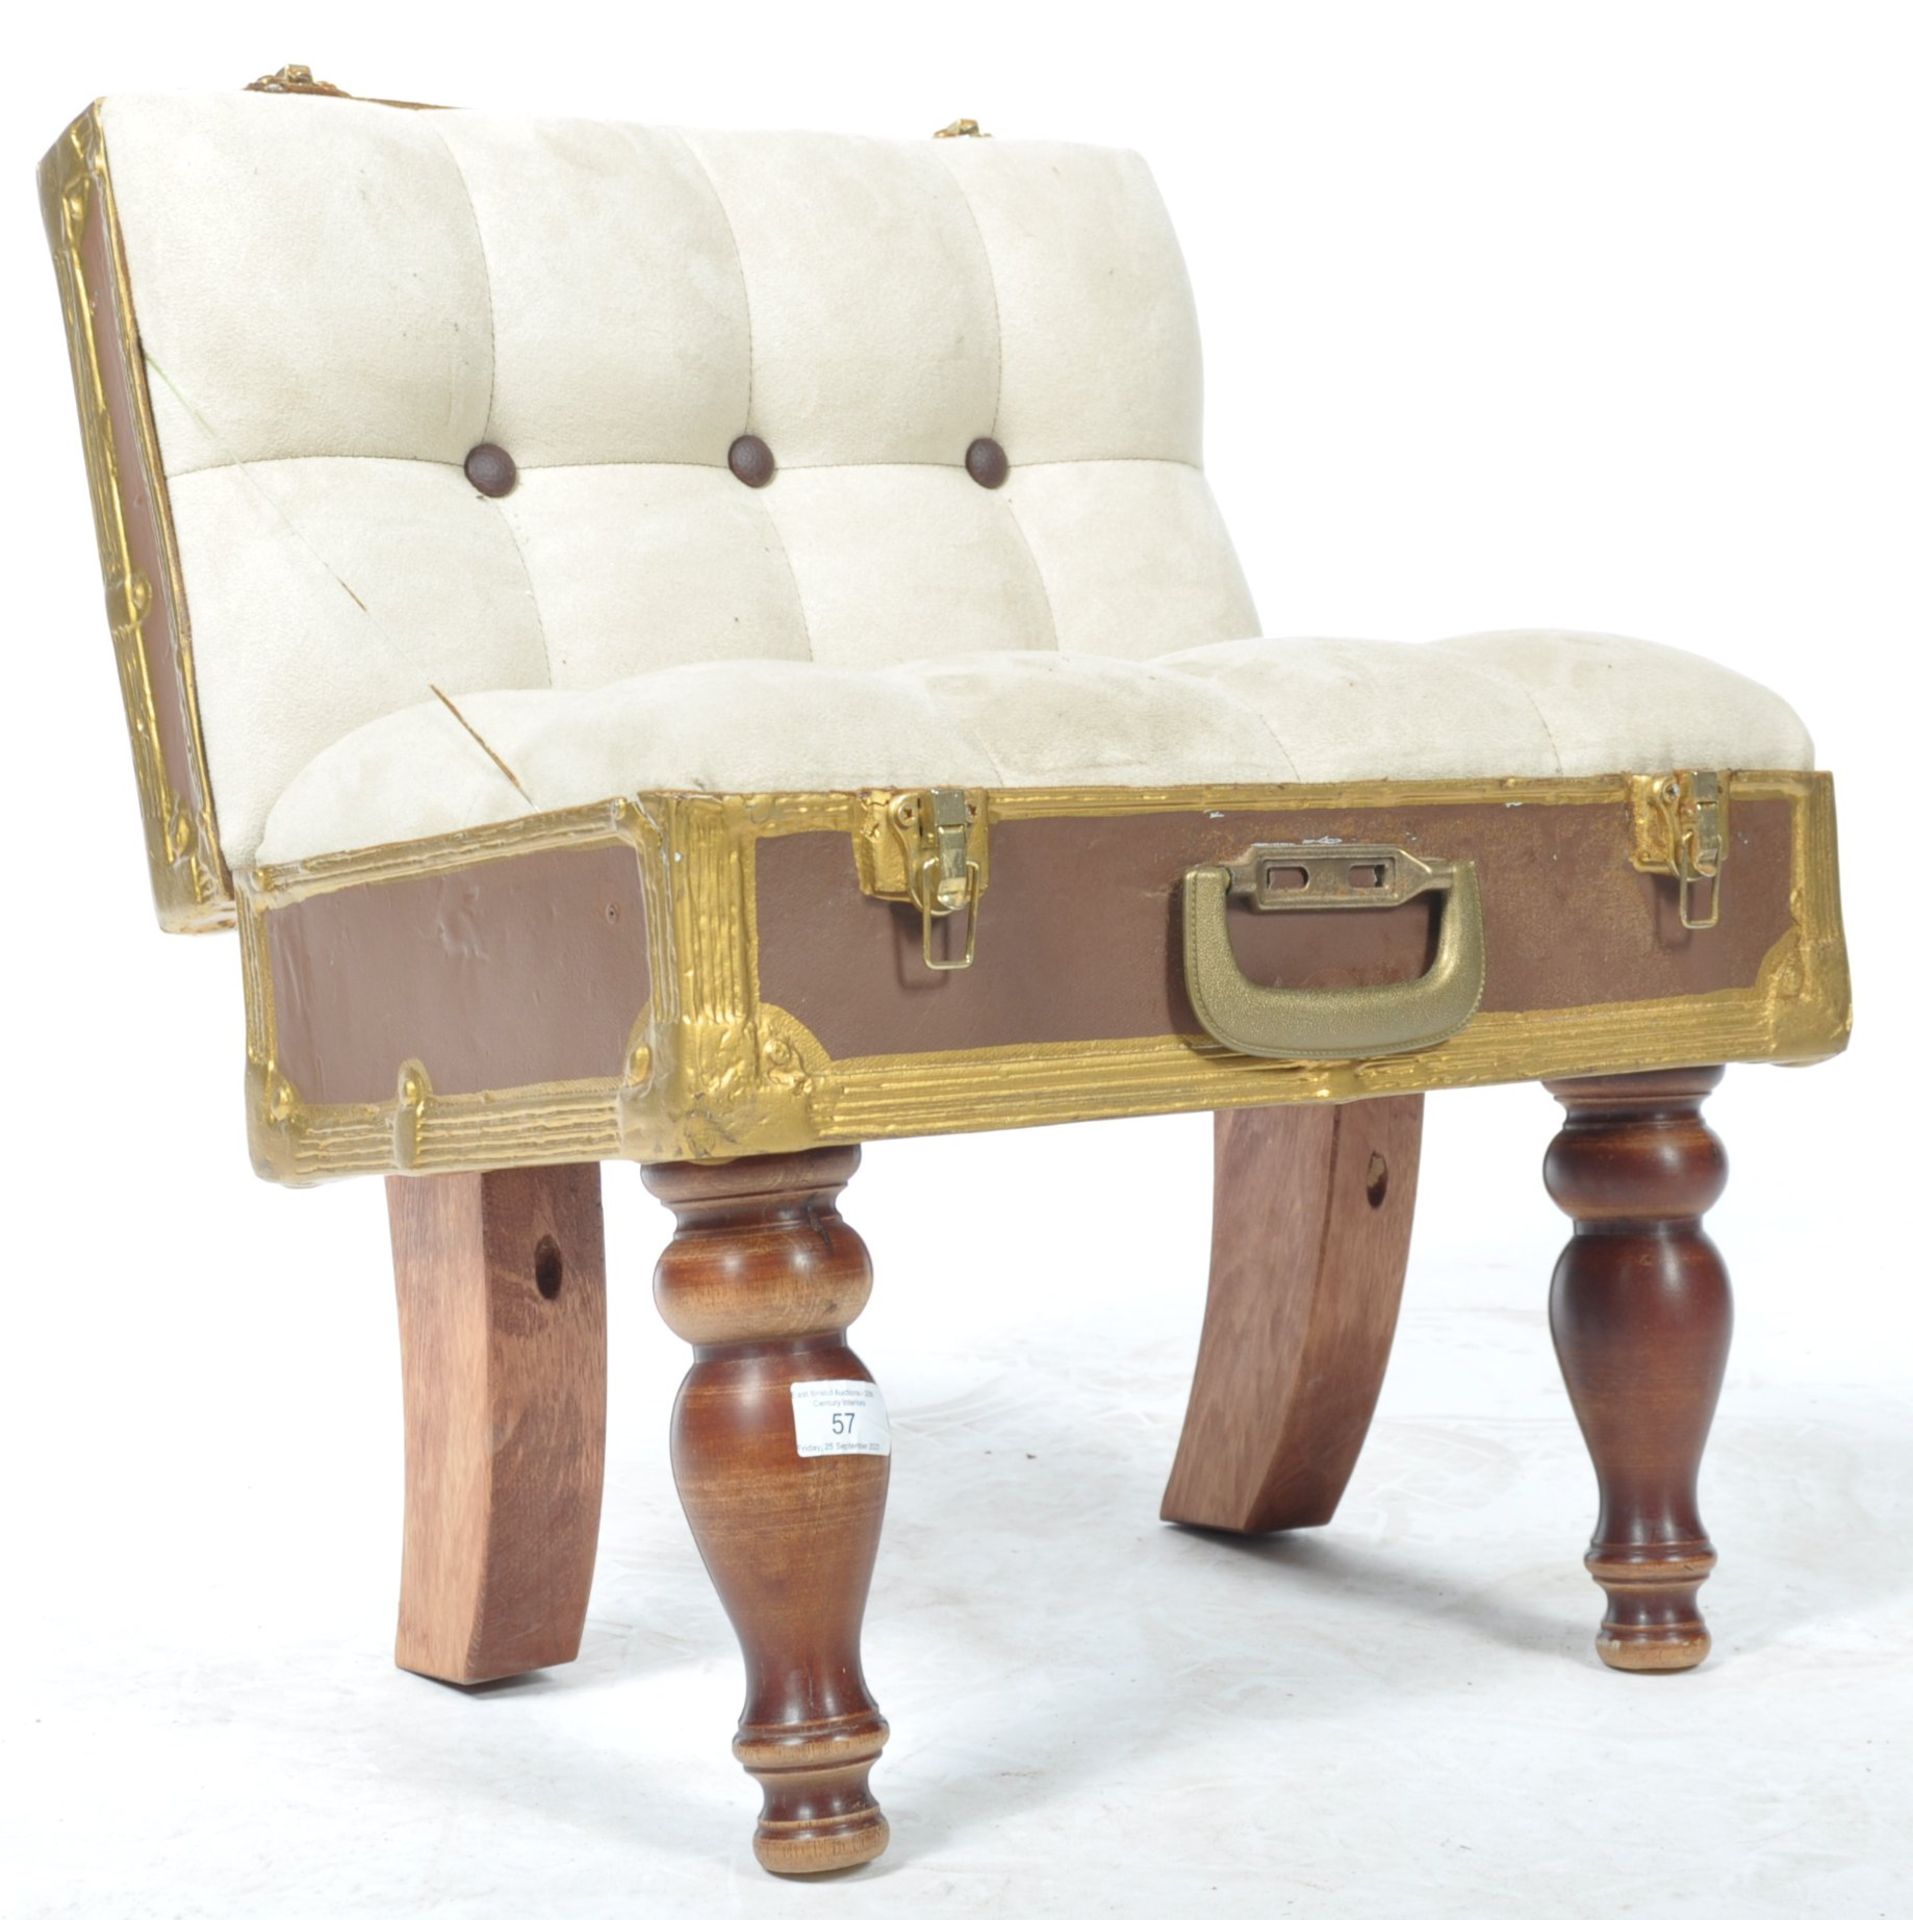 UNUSUAL BUTTON BACK CHAIR IN THE FORM A TRAVEL SUITCASE